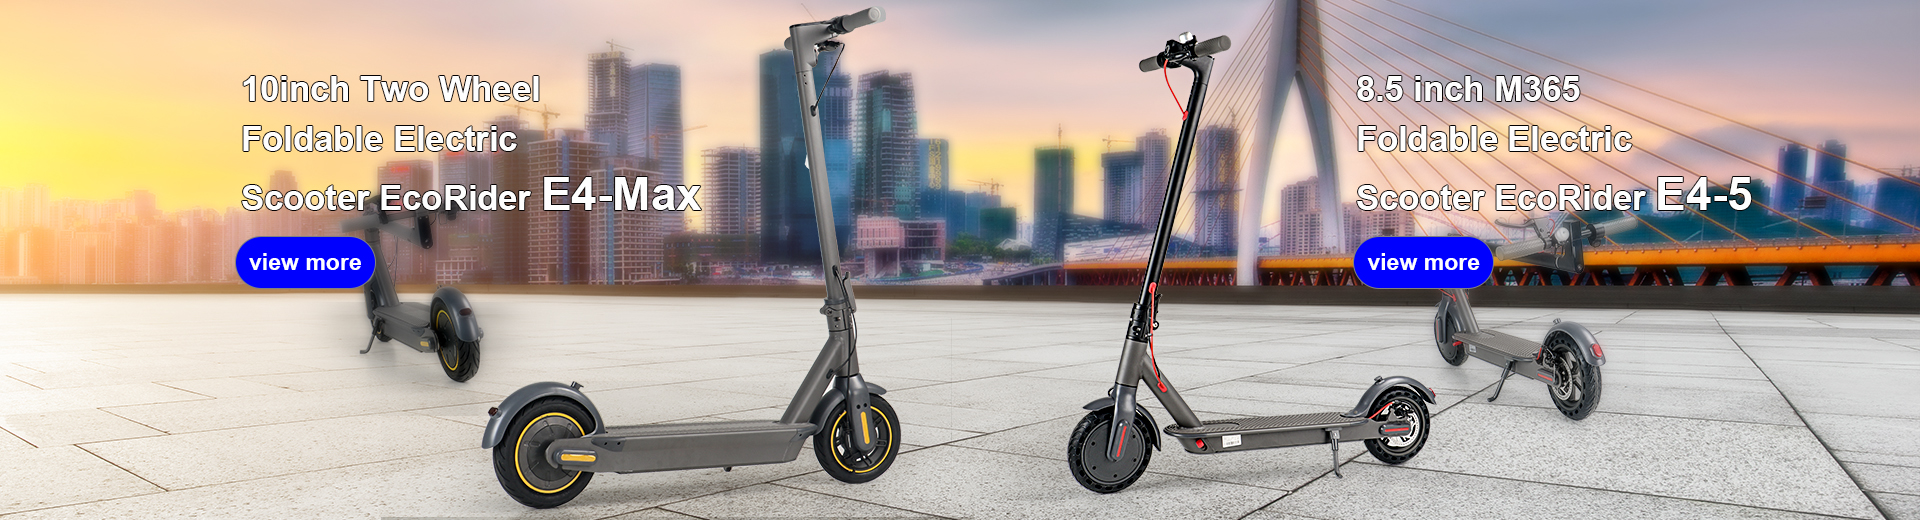 10inch Two Wheel  Foldable Electric  Scooter EcoRider E4-Max